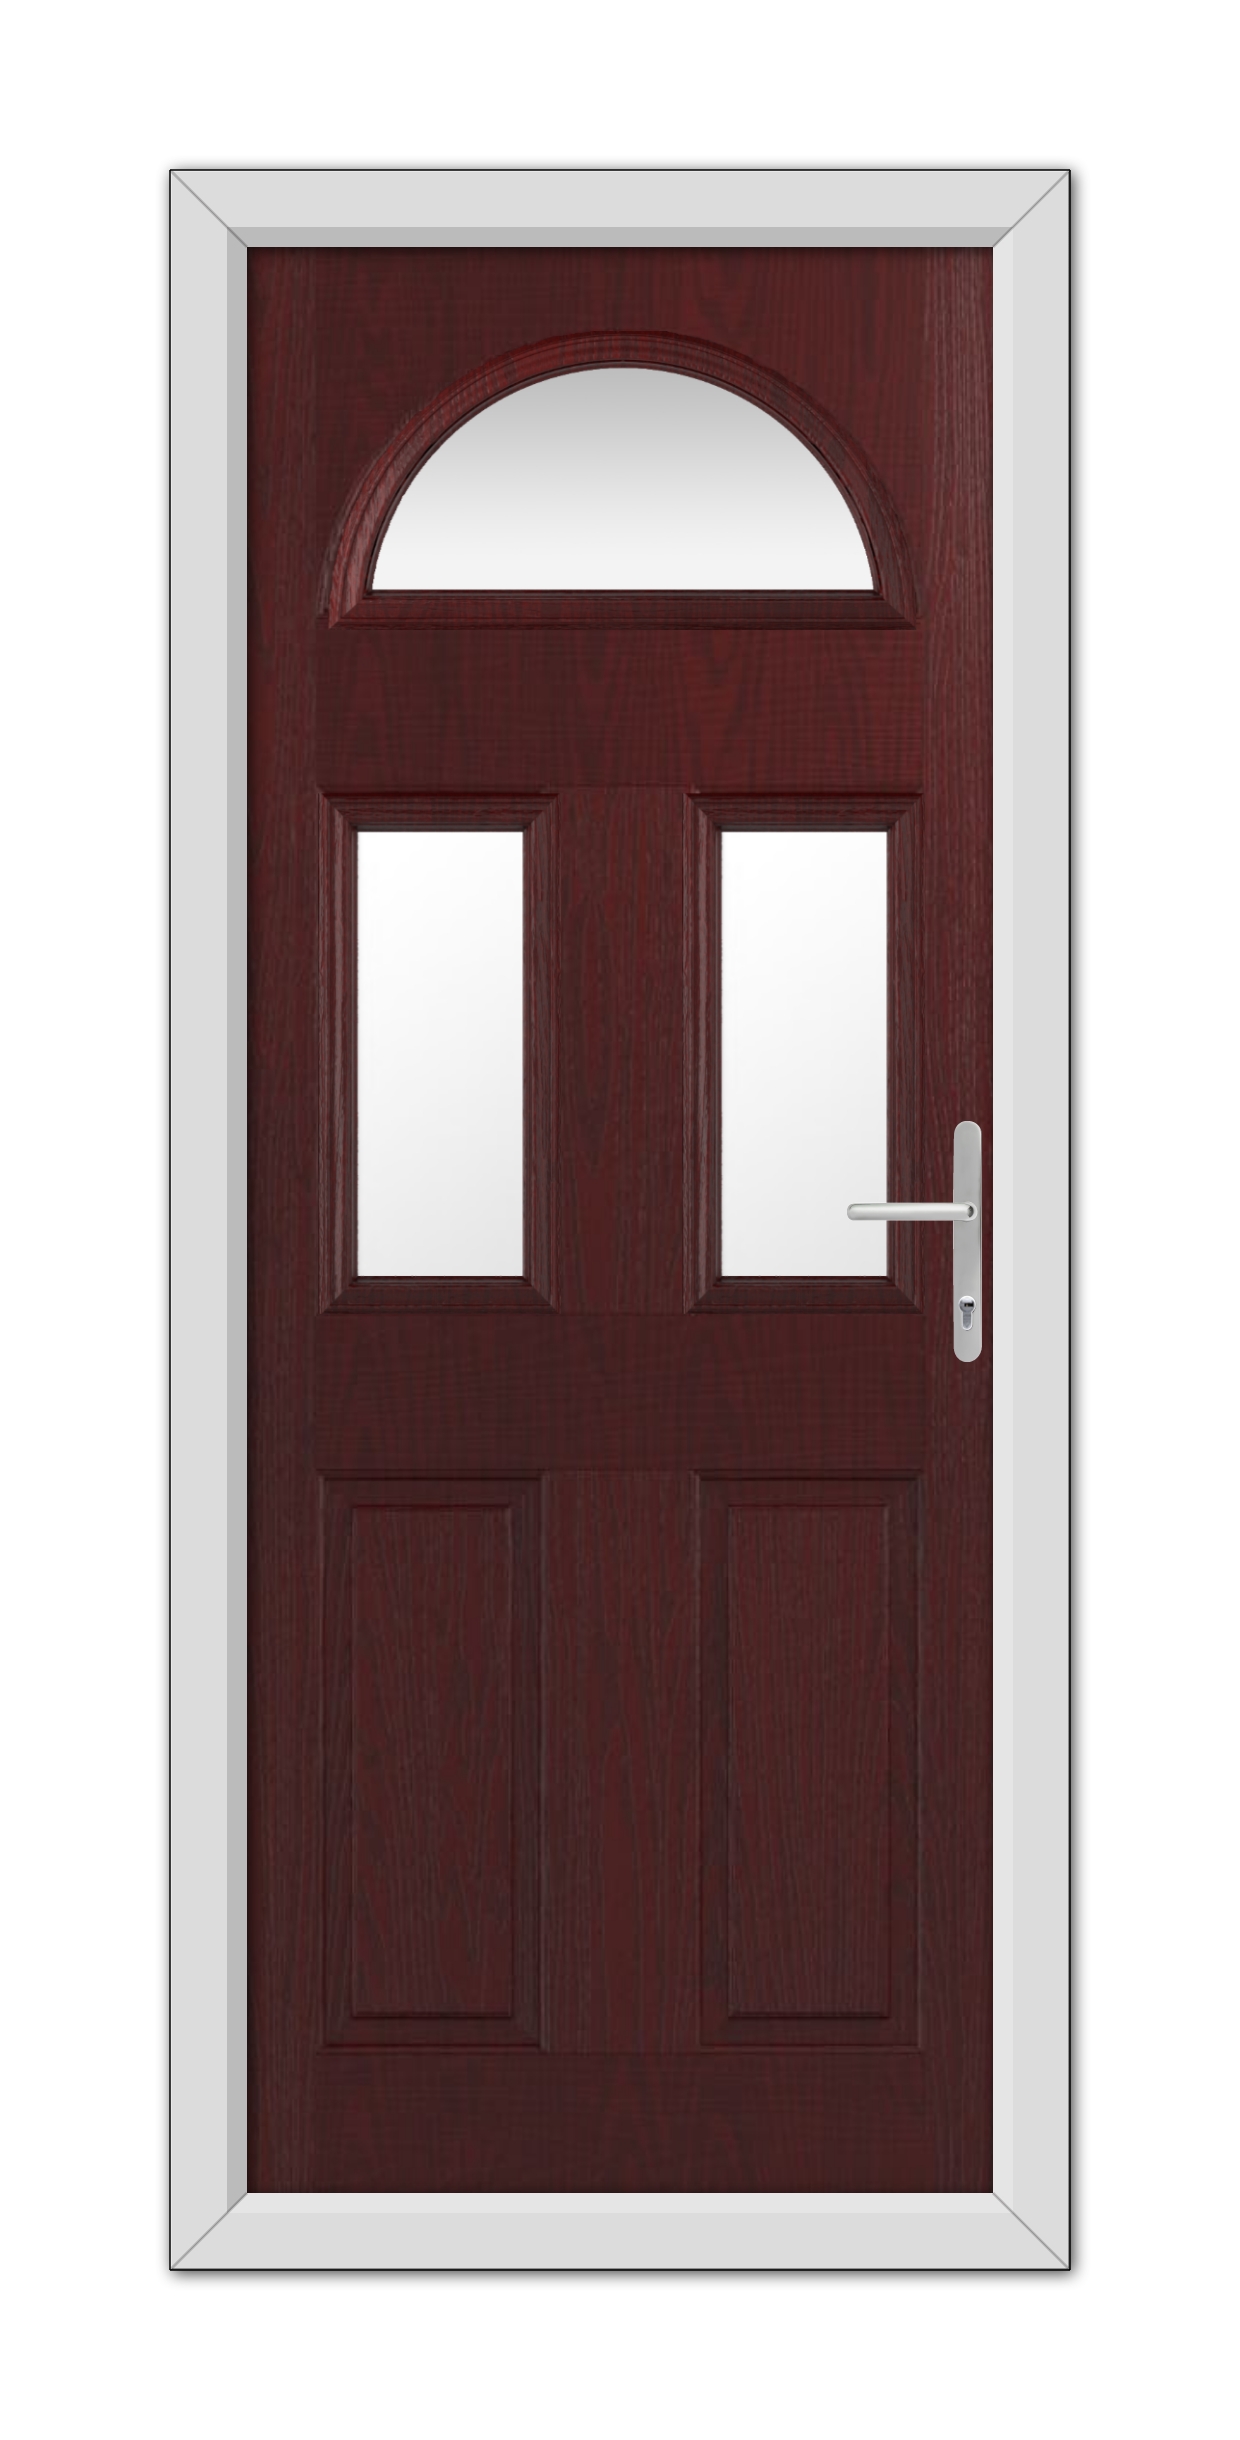 A closed Rosewood Winslow 3 Composite Door 48mm Timber Core with a white frame, featuring a semicircular window at the top and a metal handle on the right side.